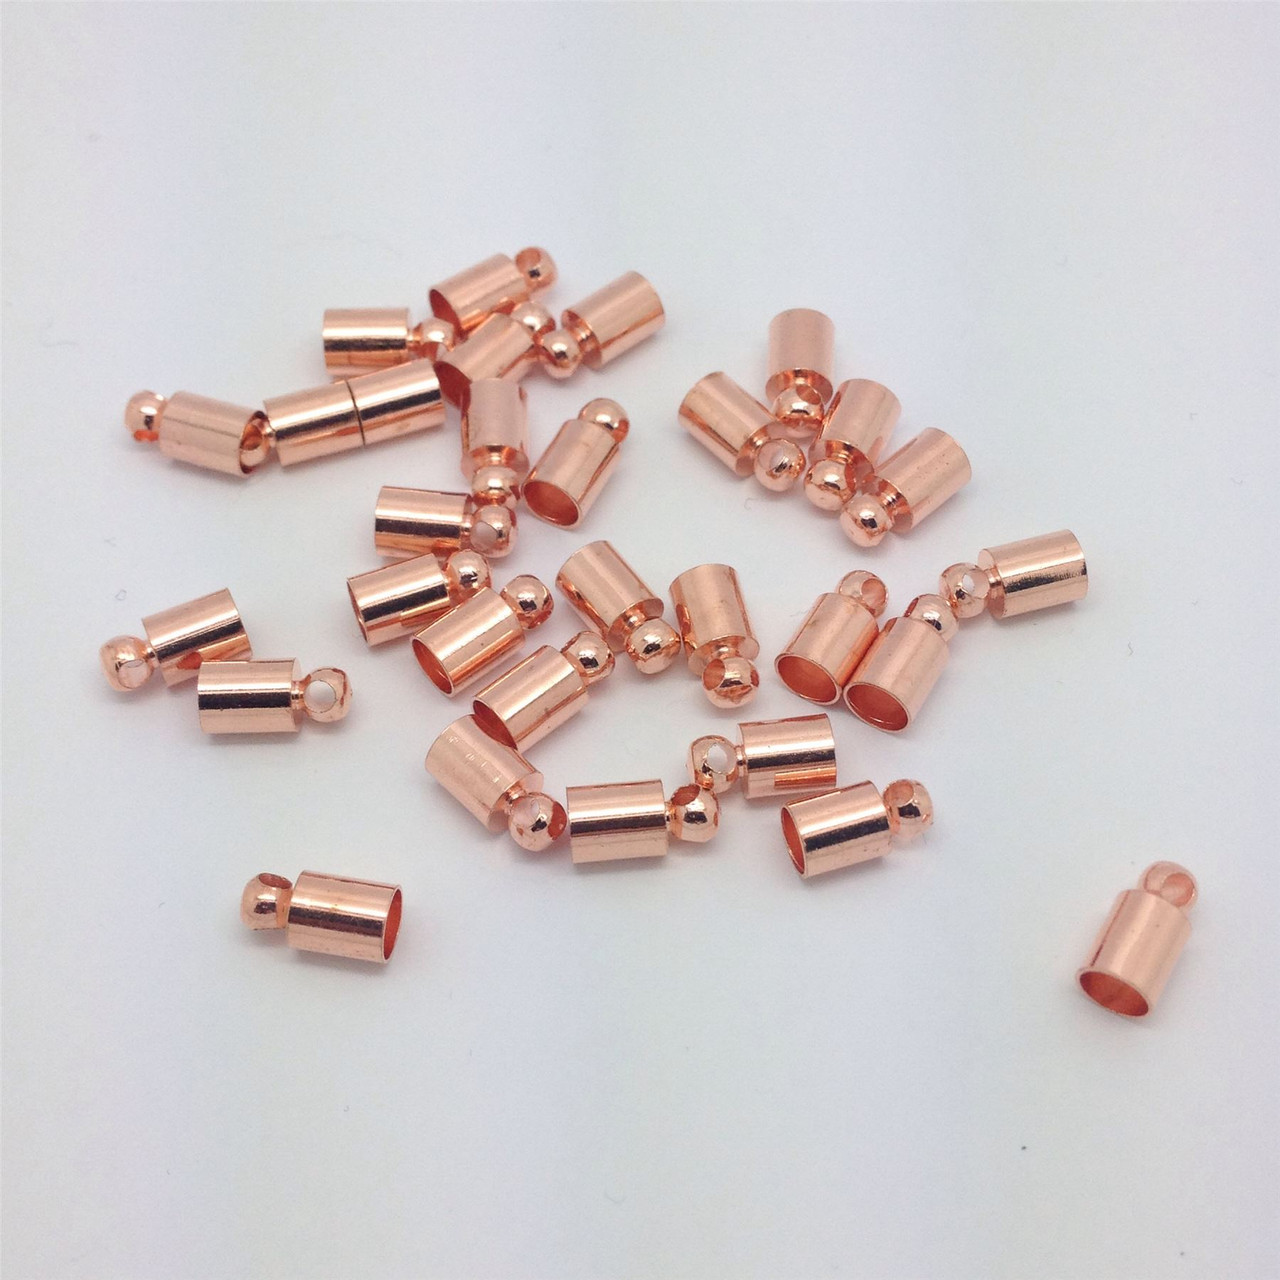 Brass Cord Ends 8mm x 4mm - Pack of 30, Rose Gold coloured